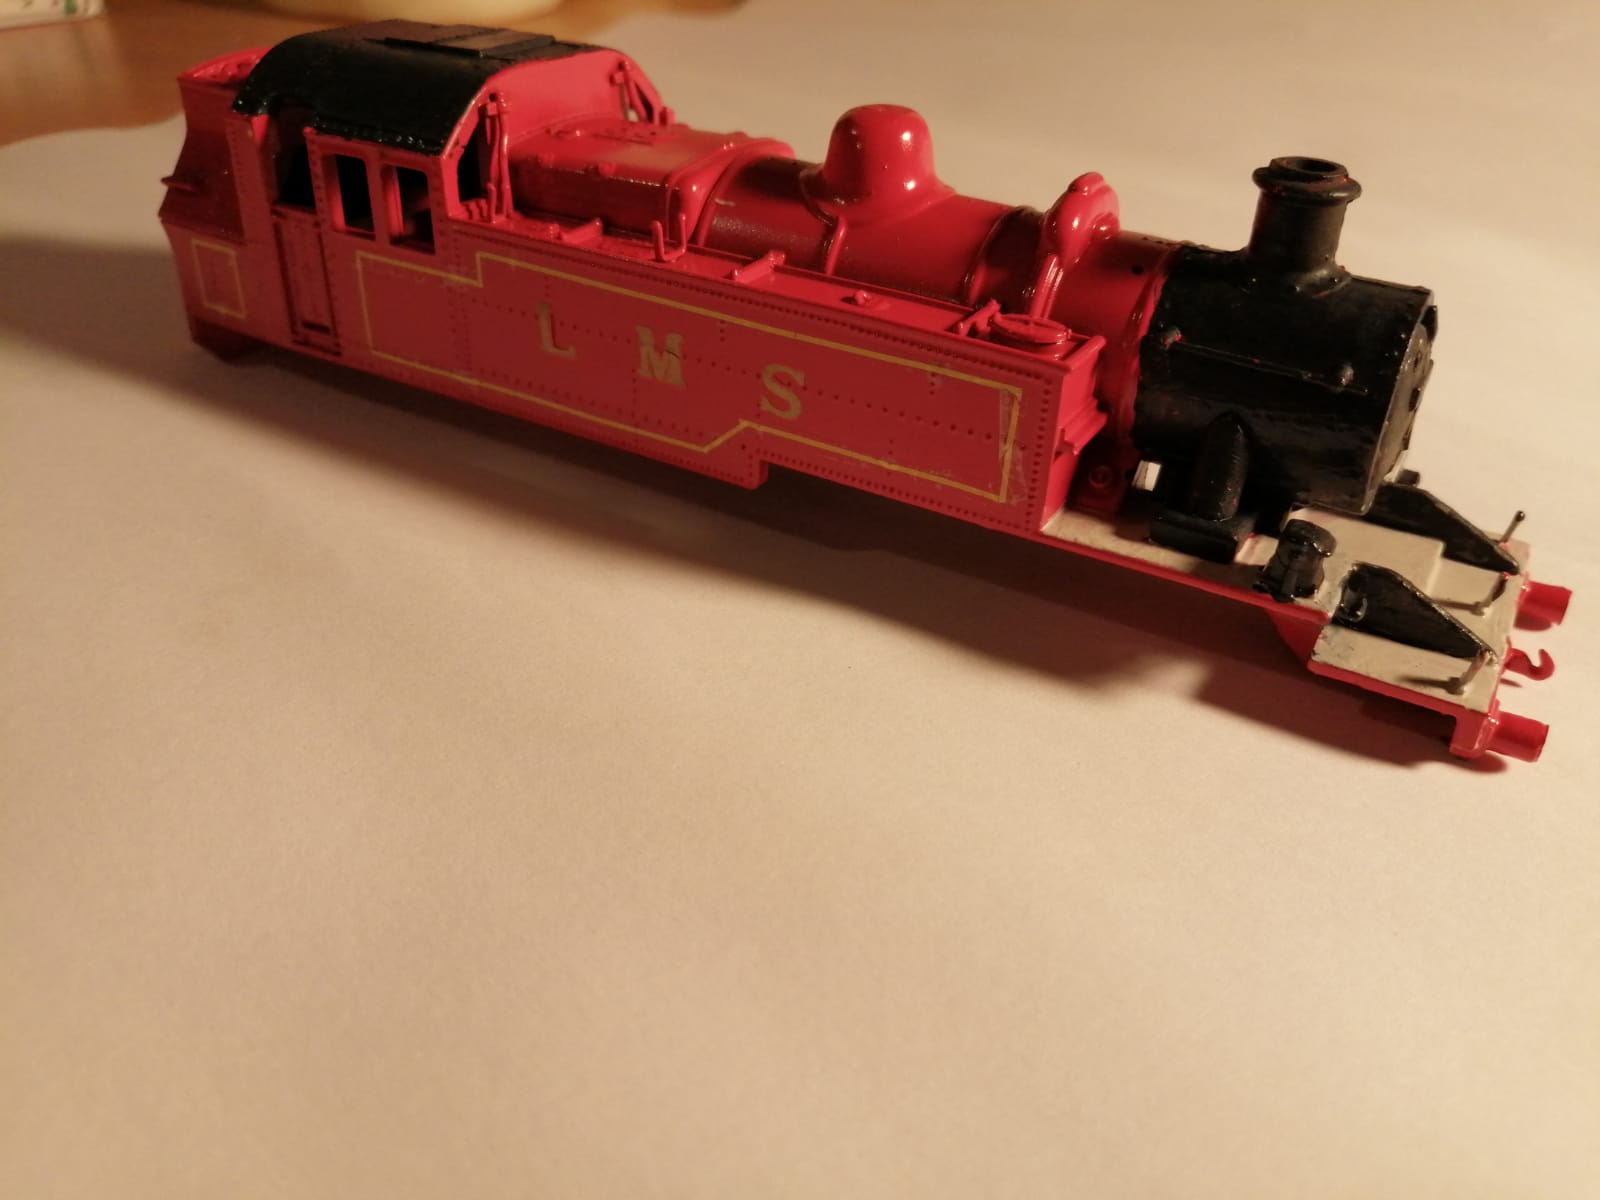 A customised model of a Thomas character 